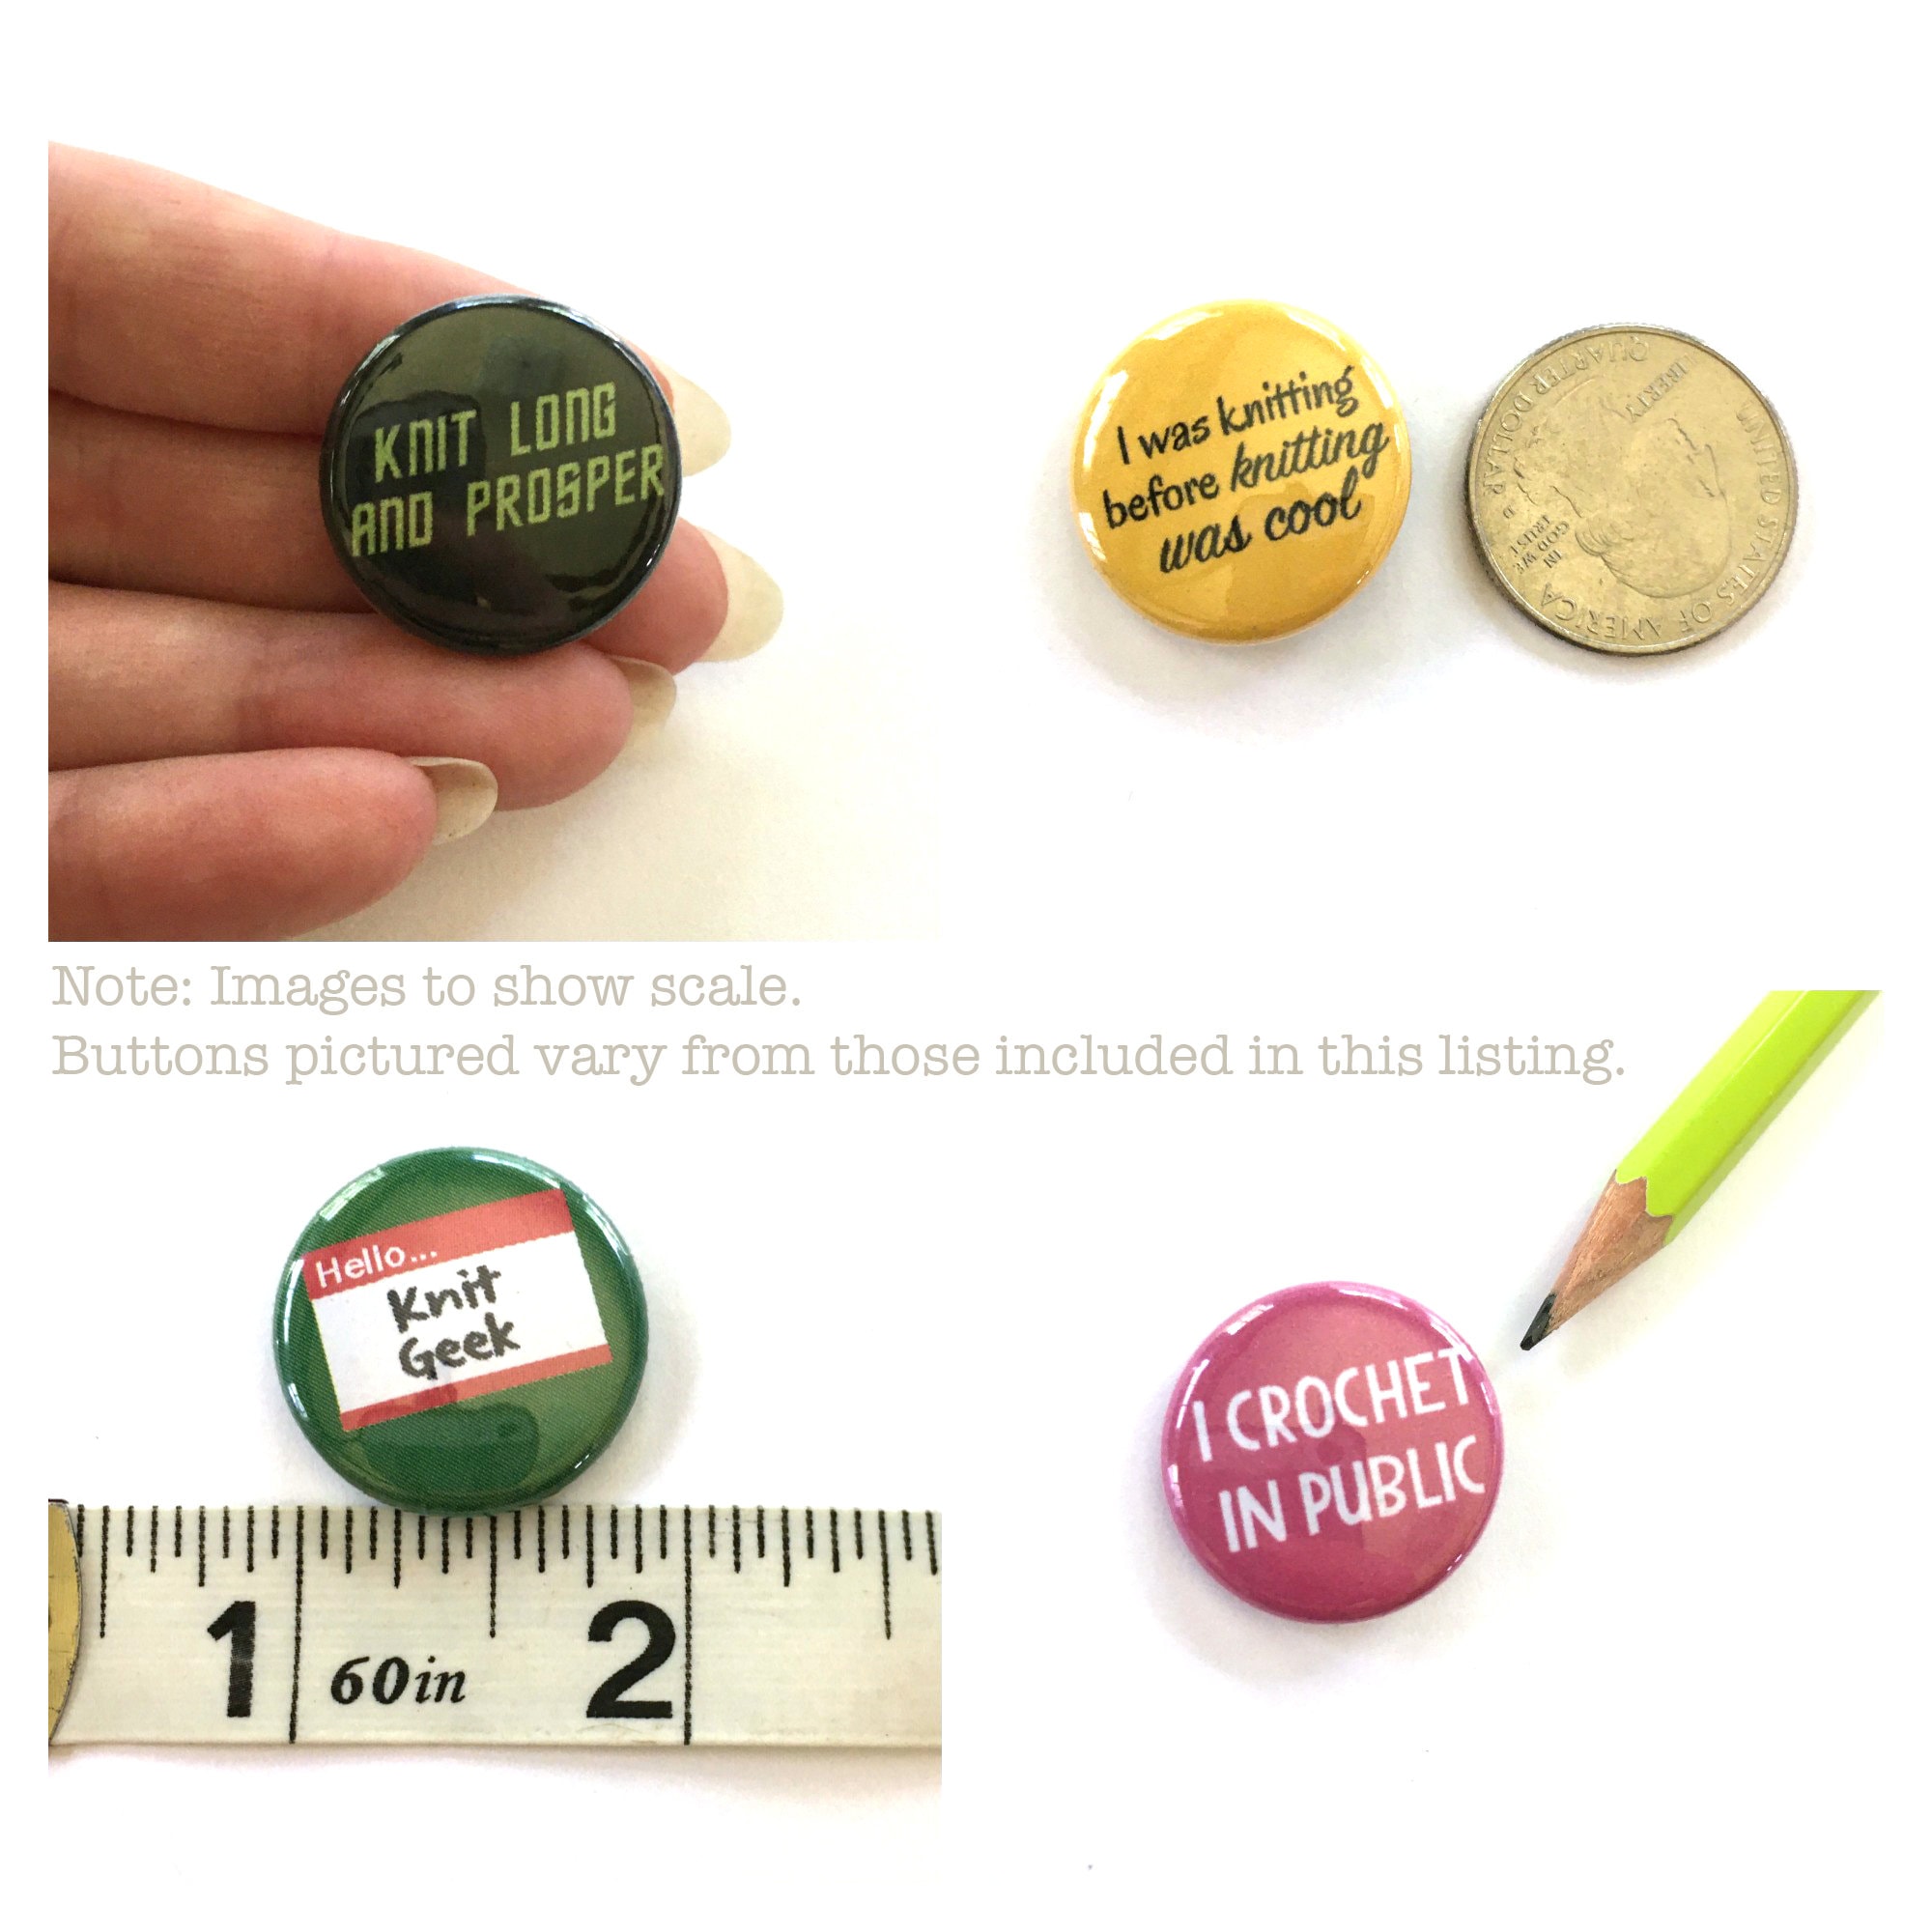 Button Pin Sets by Hopencourage